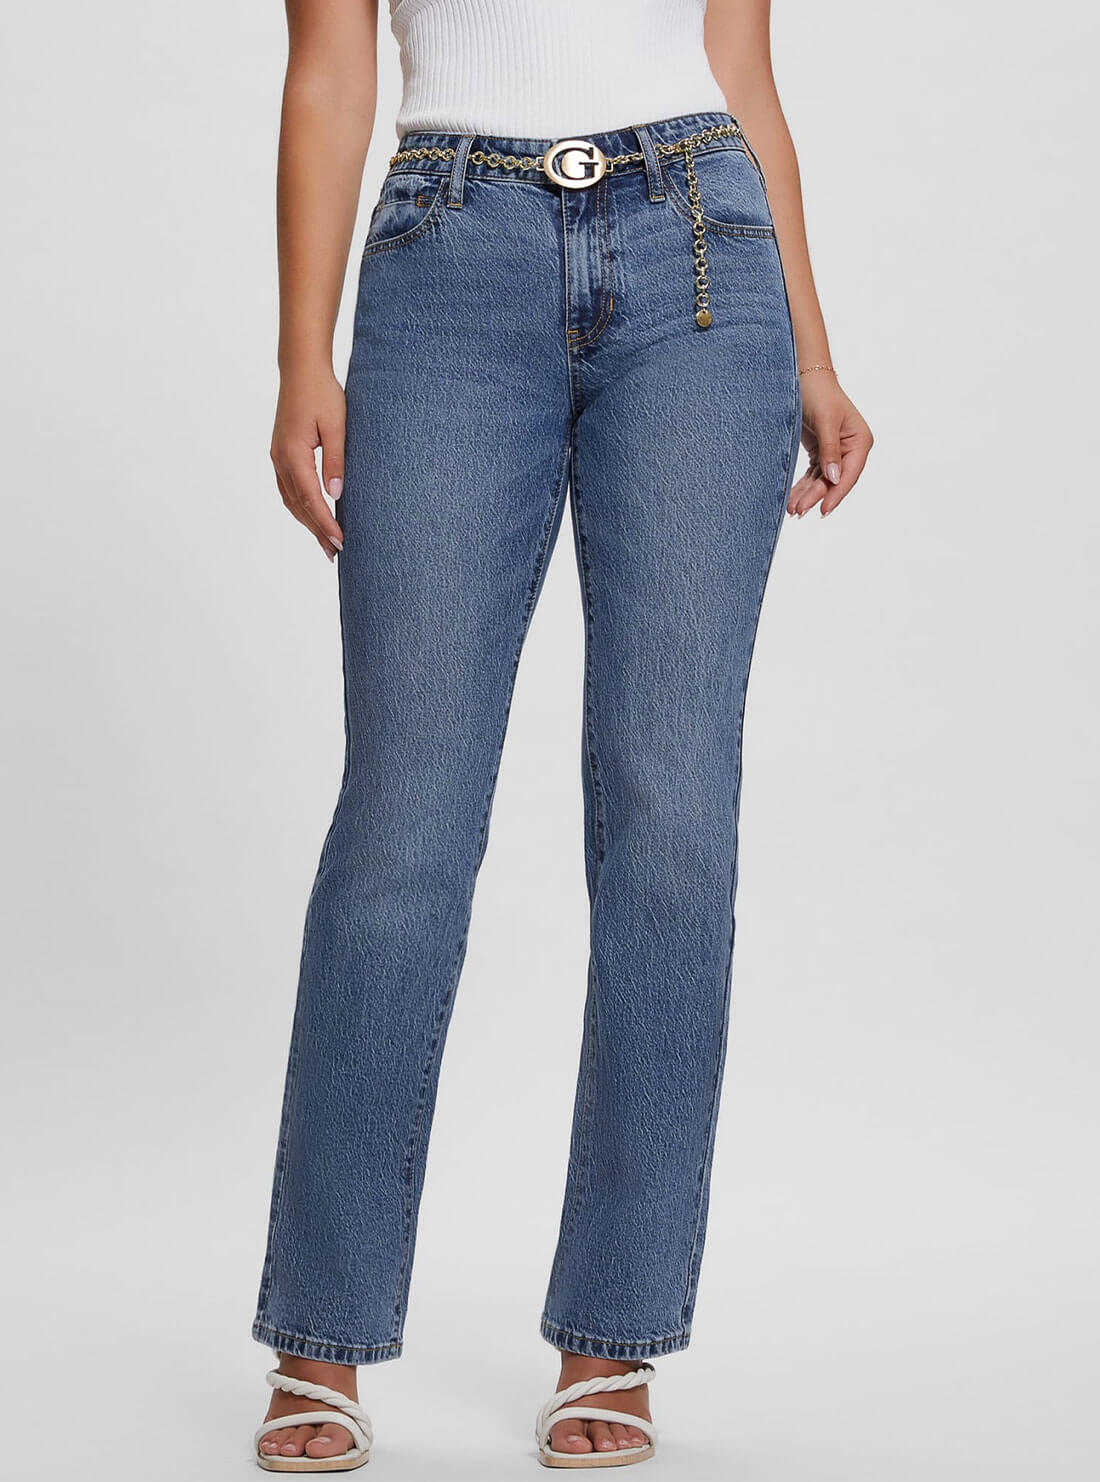 Mid-Rise G-Belt Sexy Straight Leg Denim Jeans In Lunar Blue Wash | GUESS Women's Apparel | front view